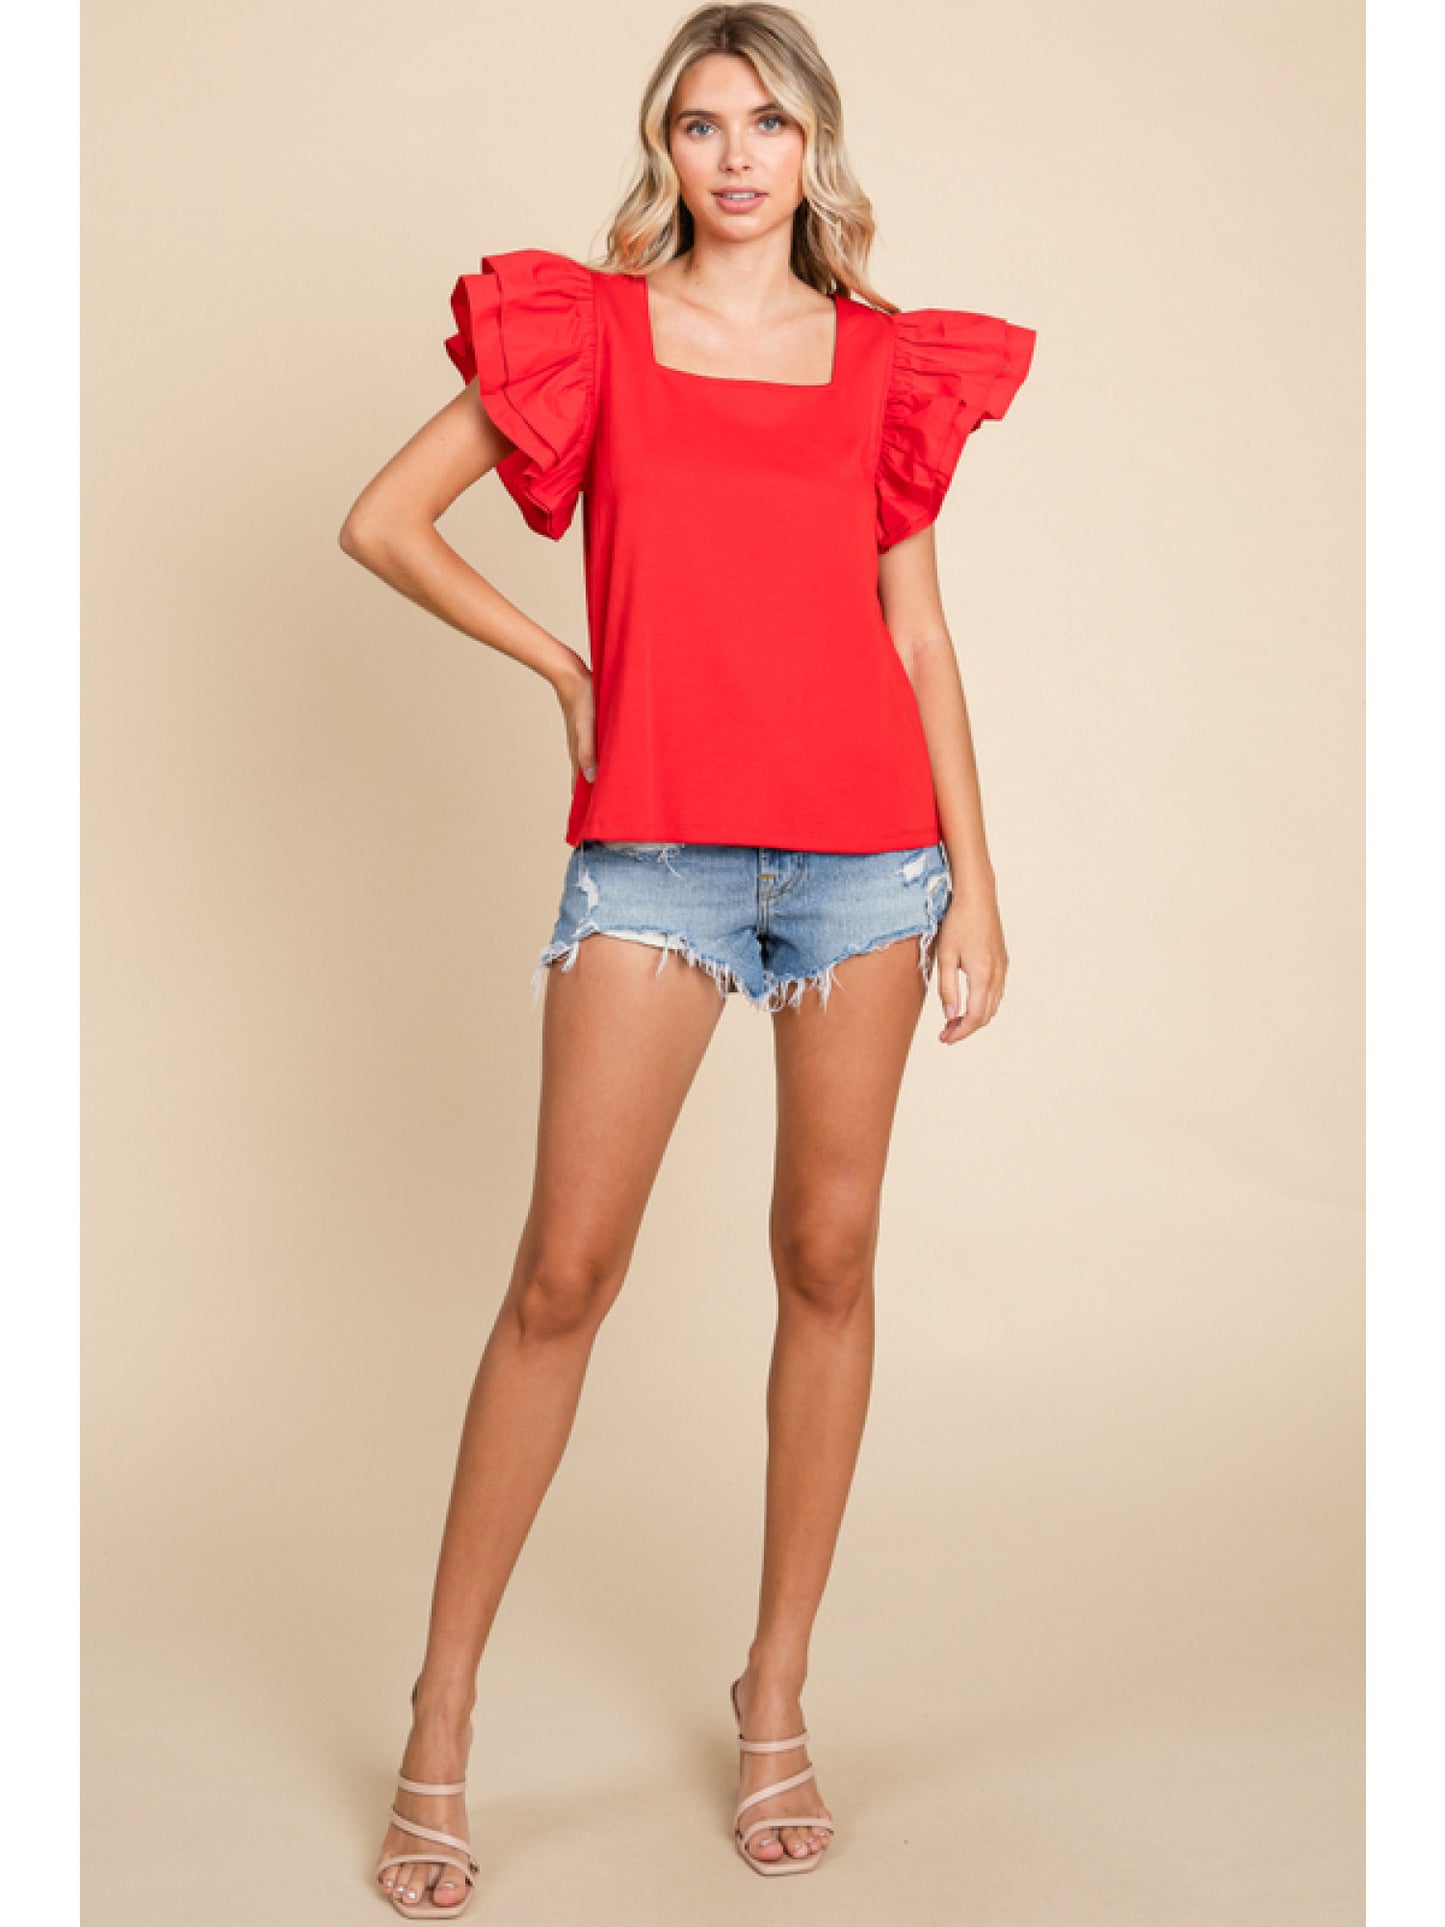 Ruffle Some Feathers Top